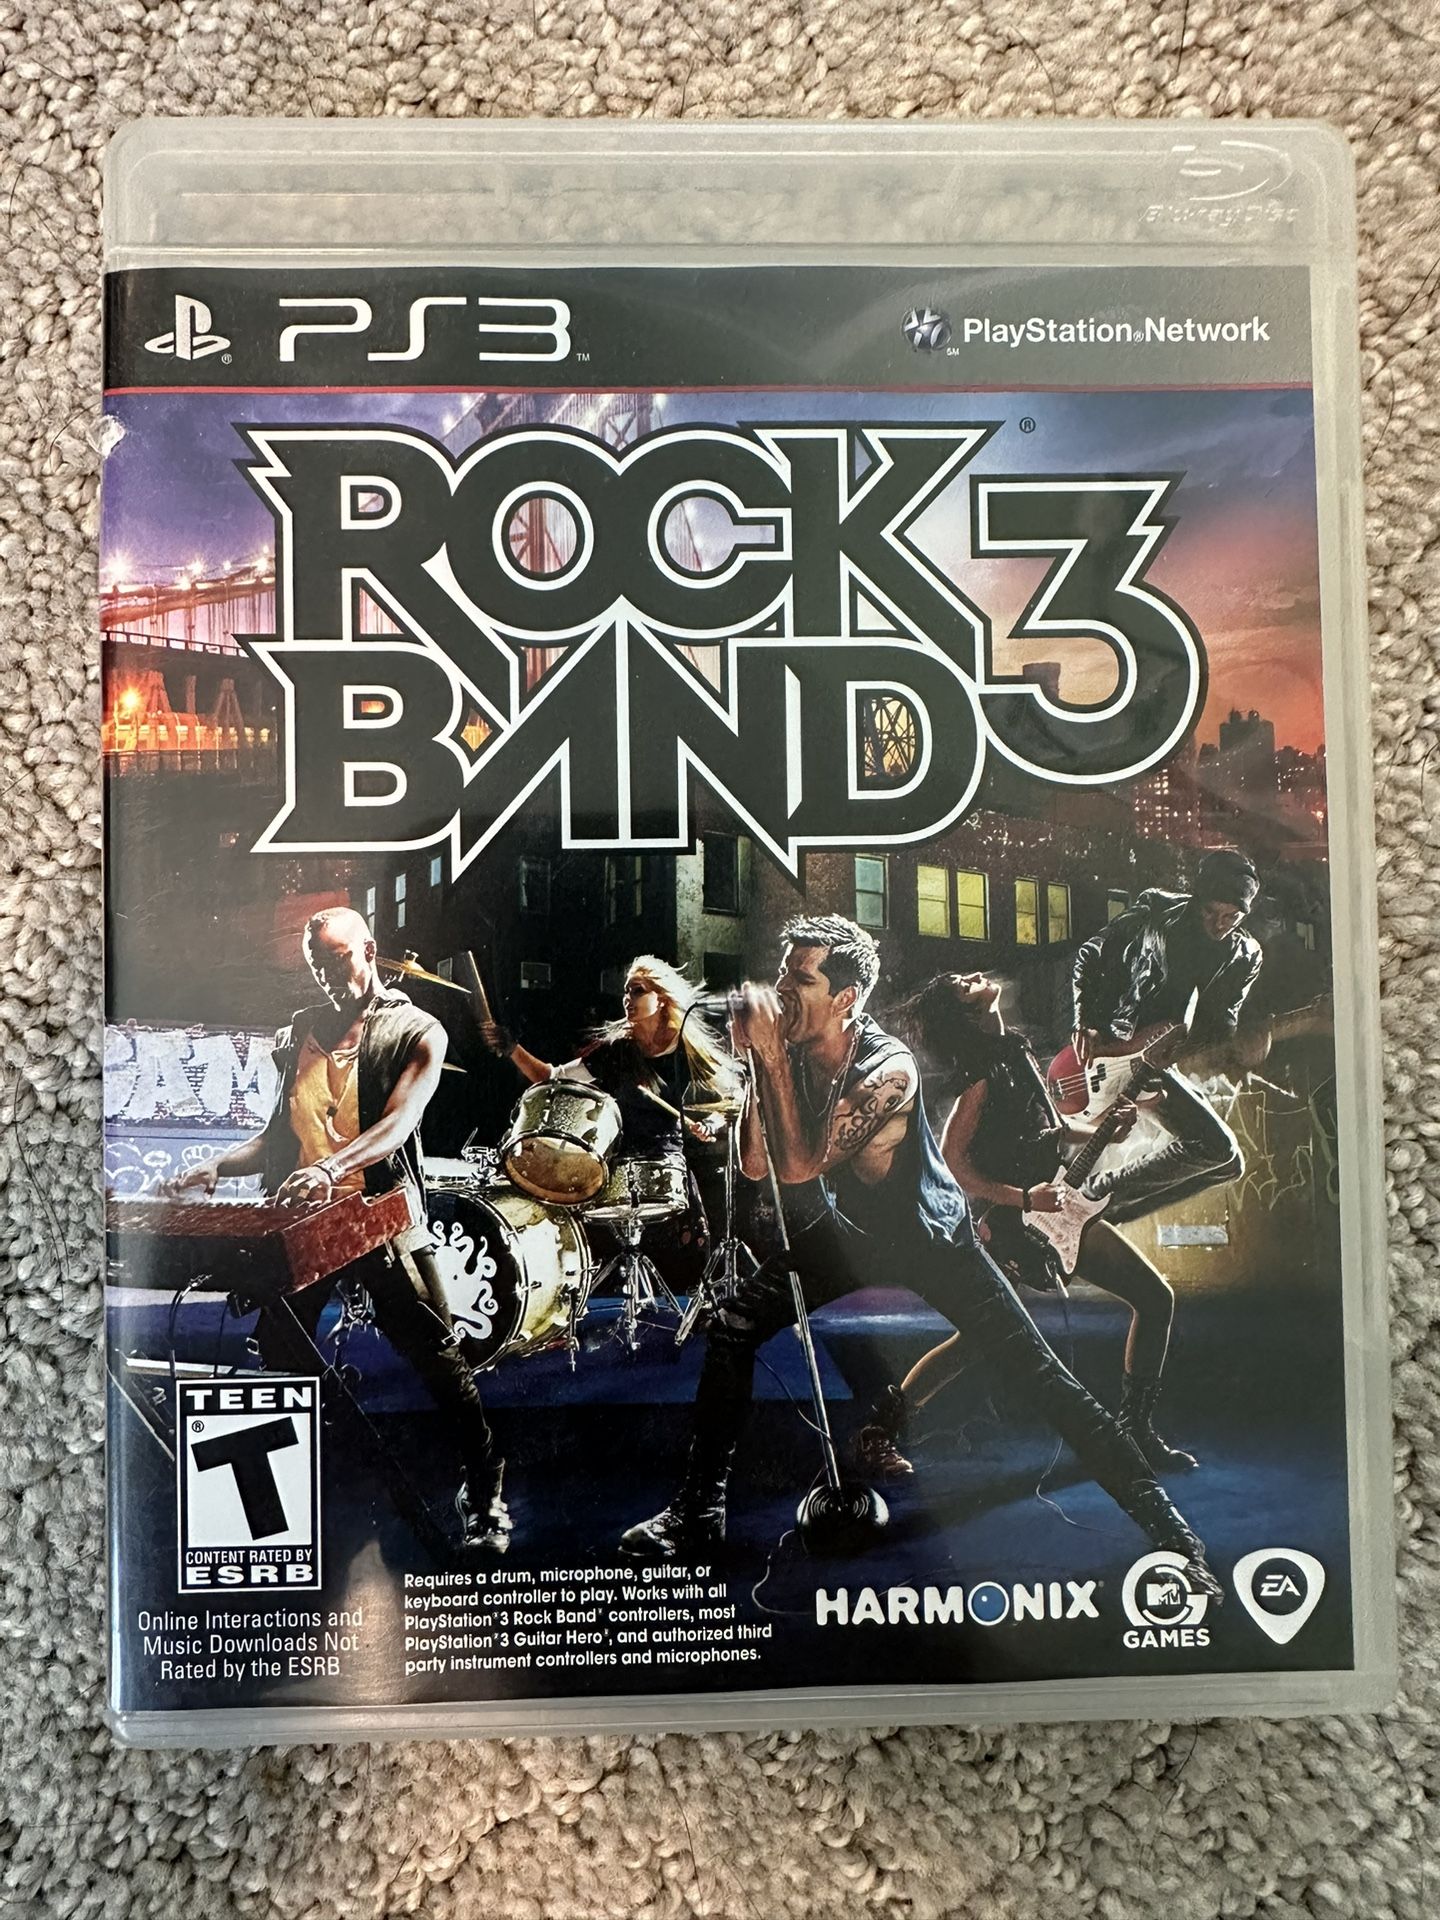 Rock Band 3 Video Game PS3 PlayStation 3